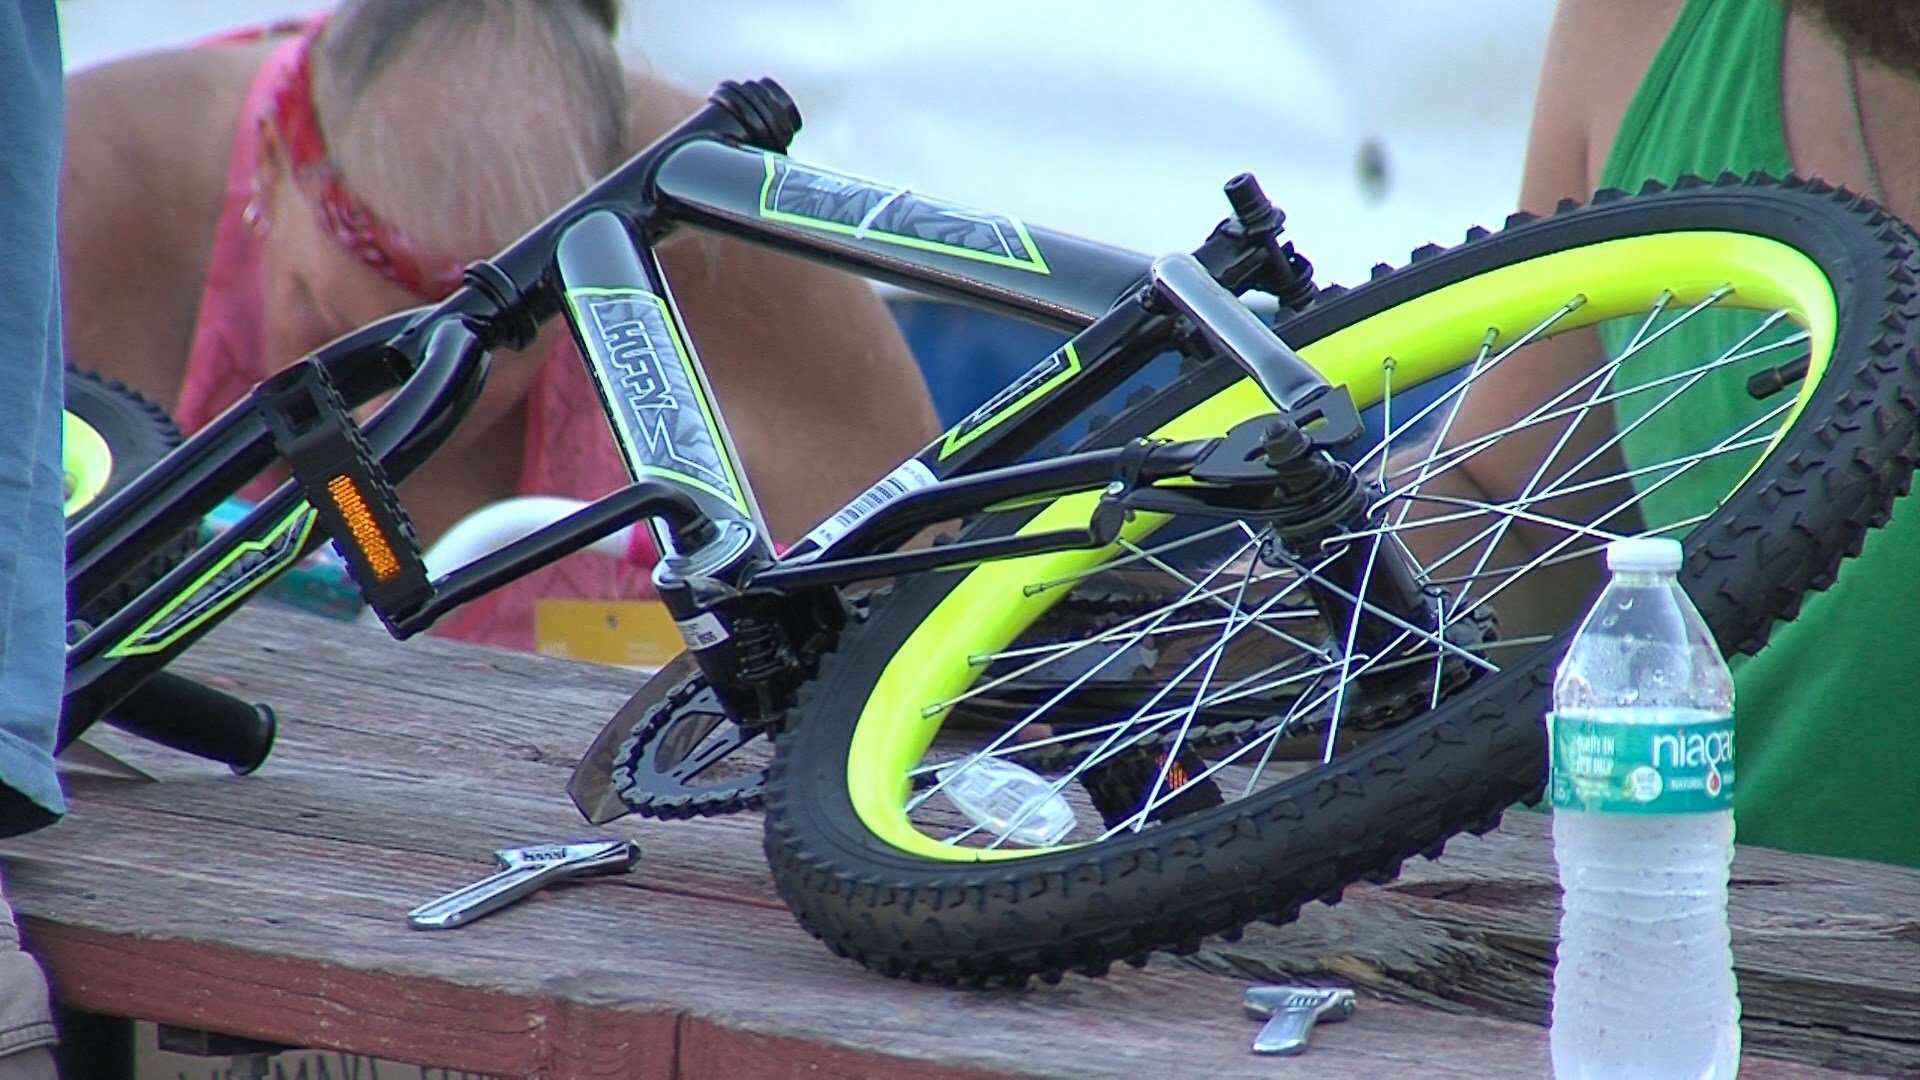 Eagle Raceway to give away $10,000 worth of kids bicycles on Saturday